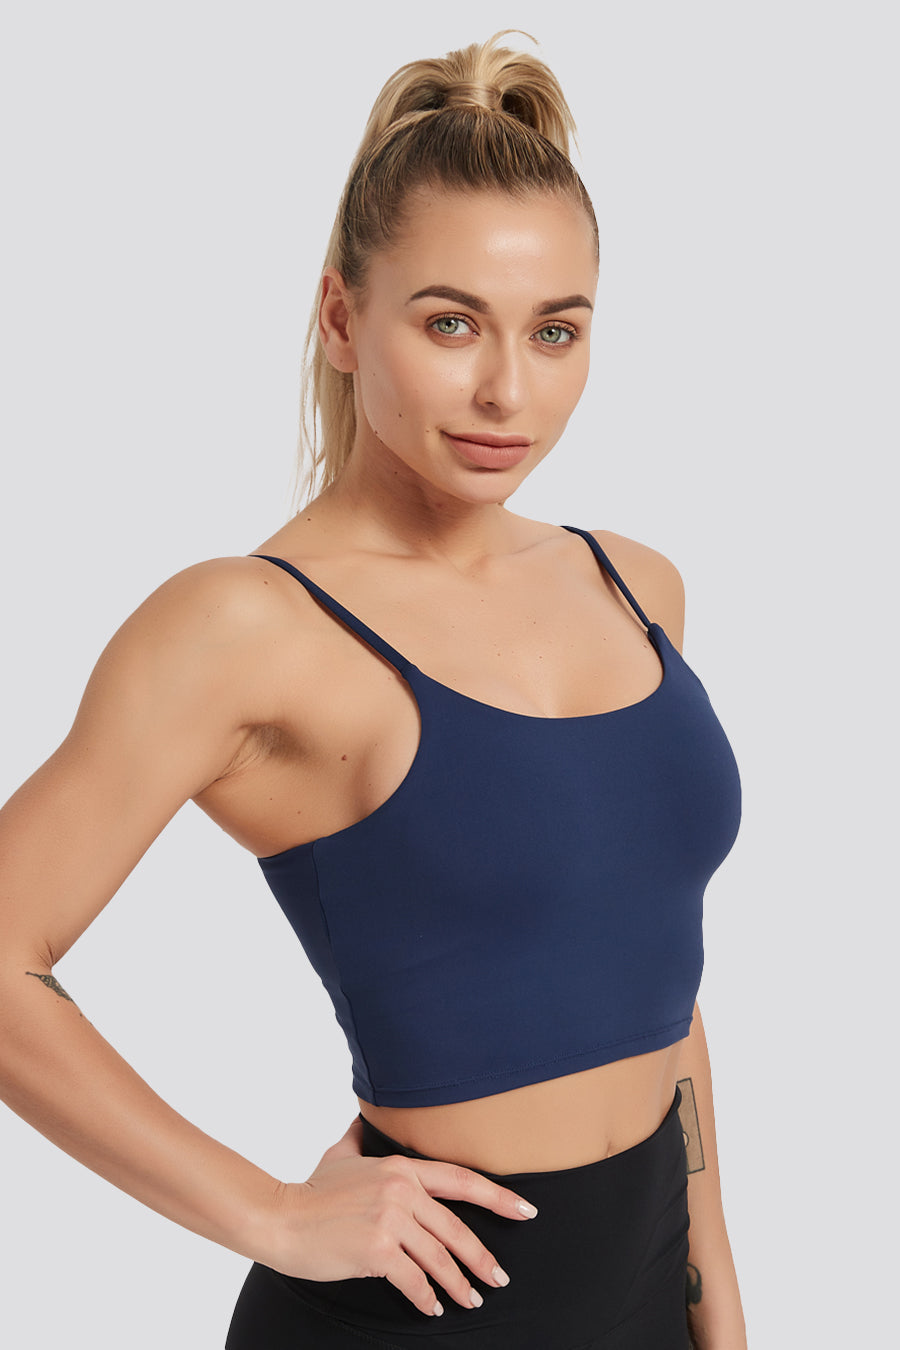 Best Deal for CANAFA Ribbed Workout Tank Tops For Women With Built In Bra